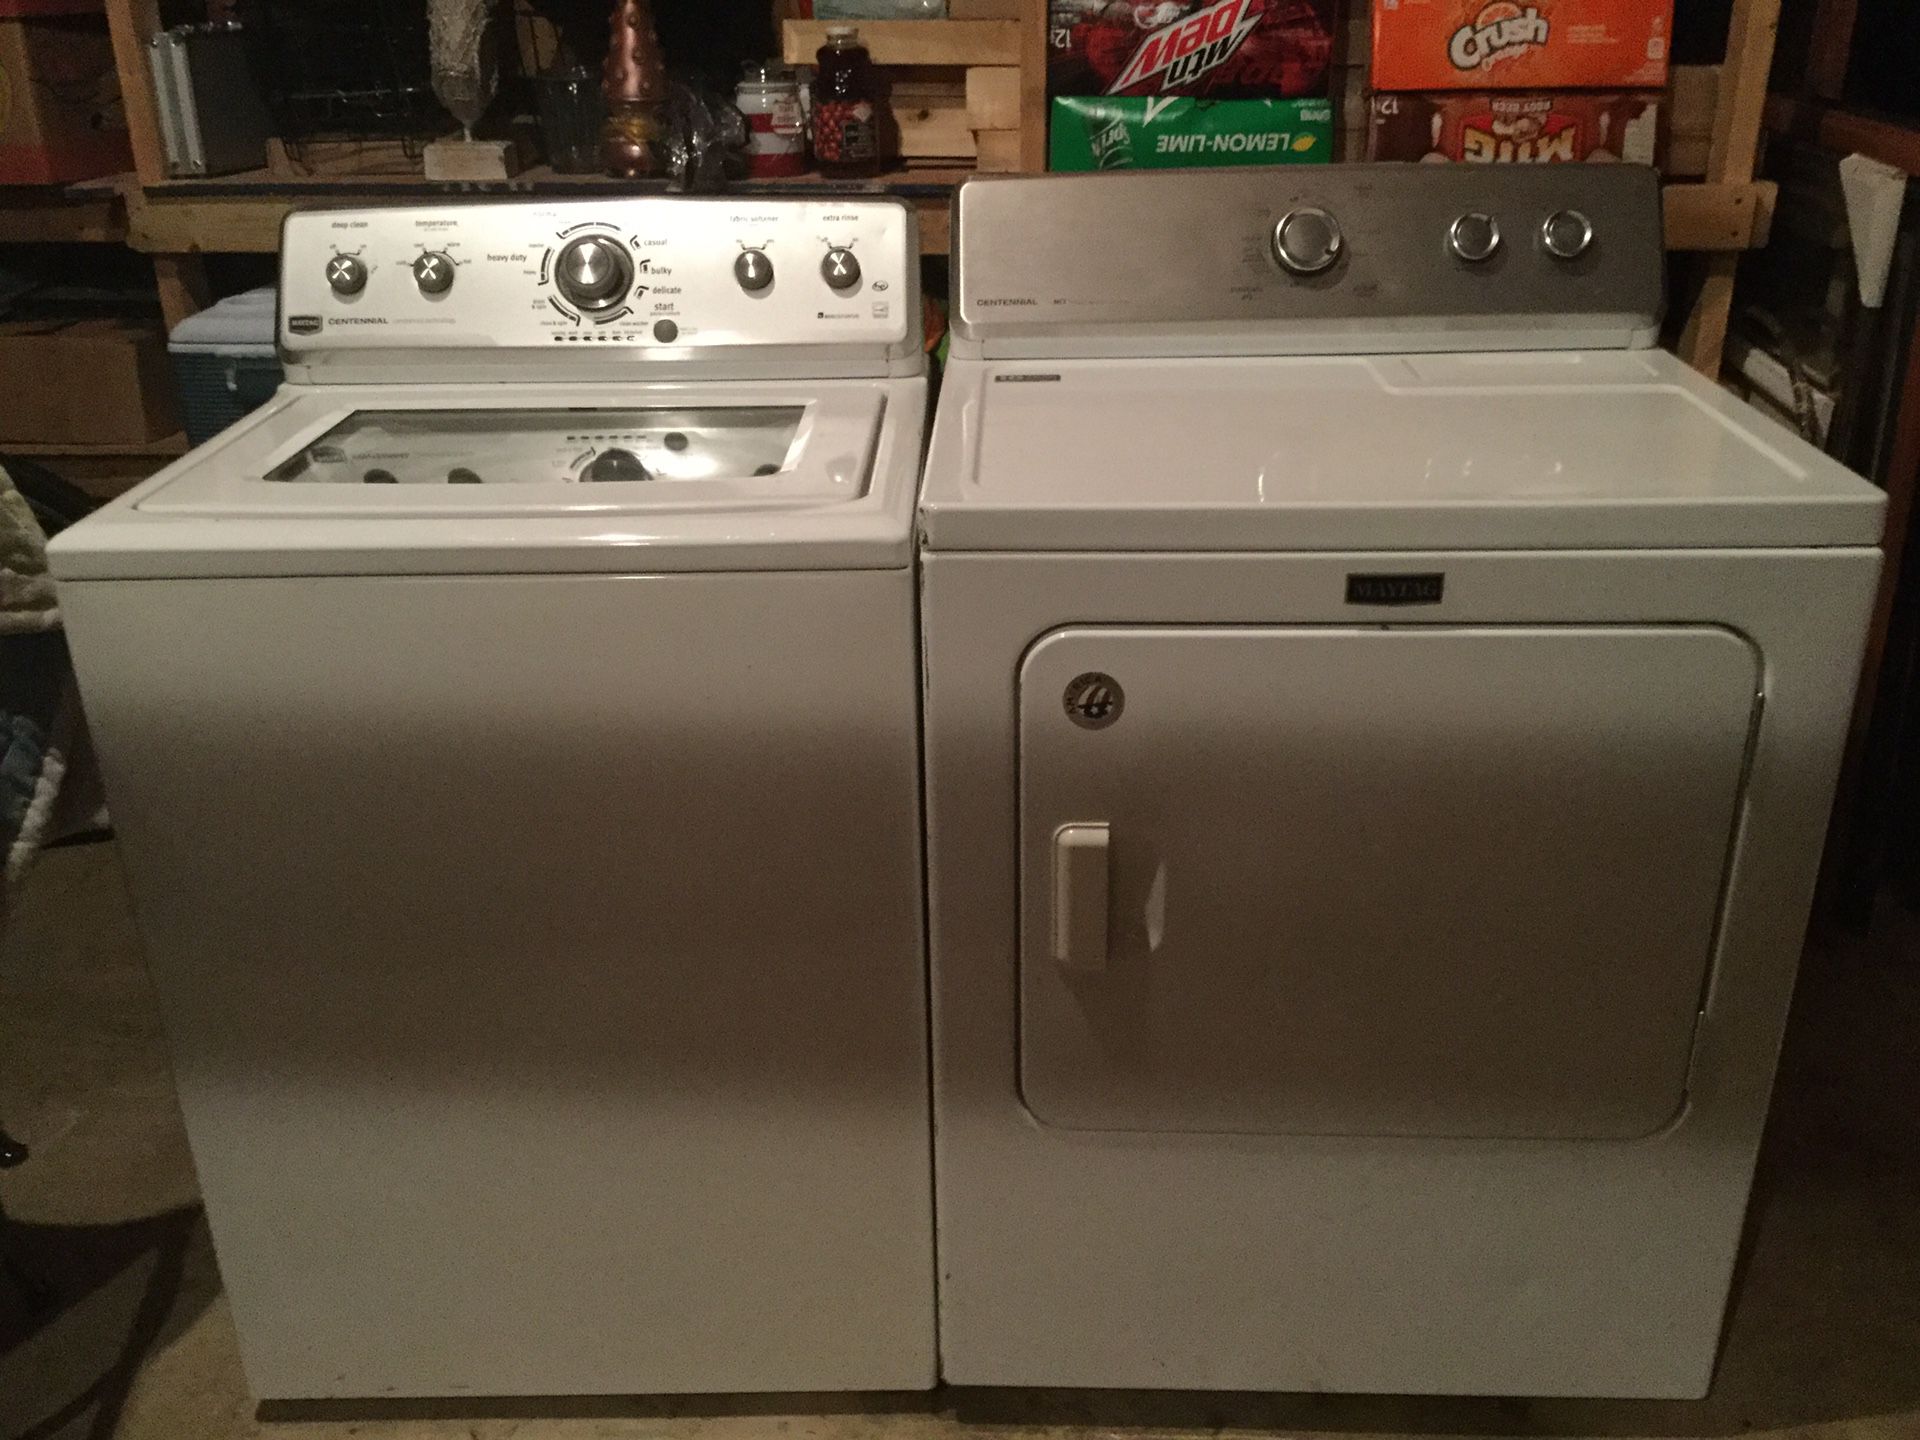 Maytag Electric Washer Washing Machine and Dryer